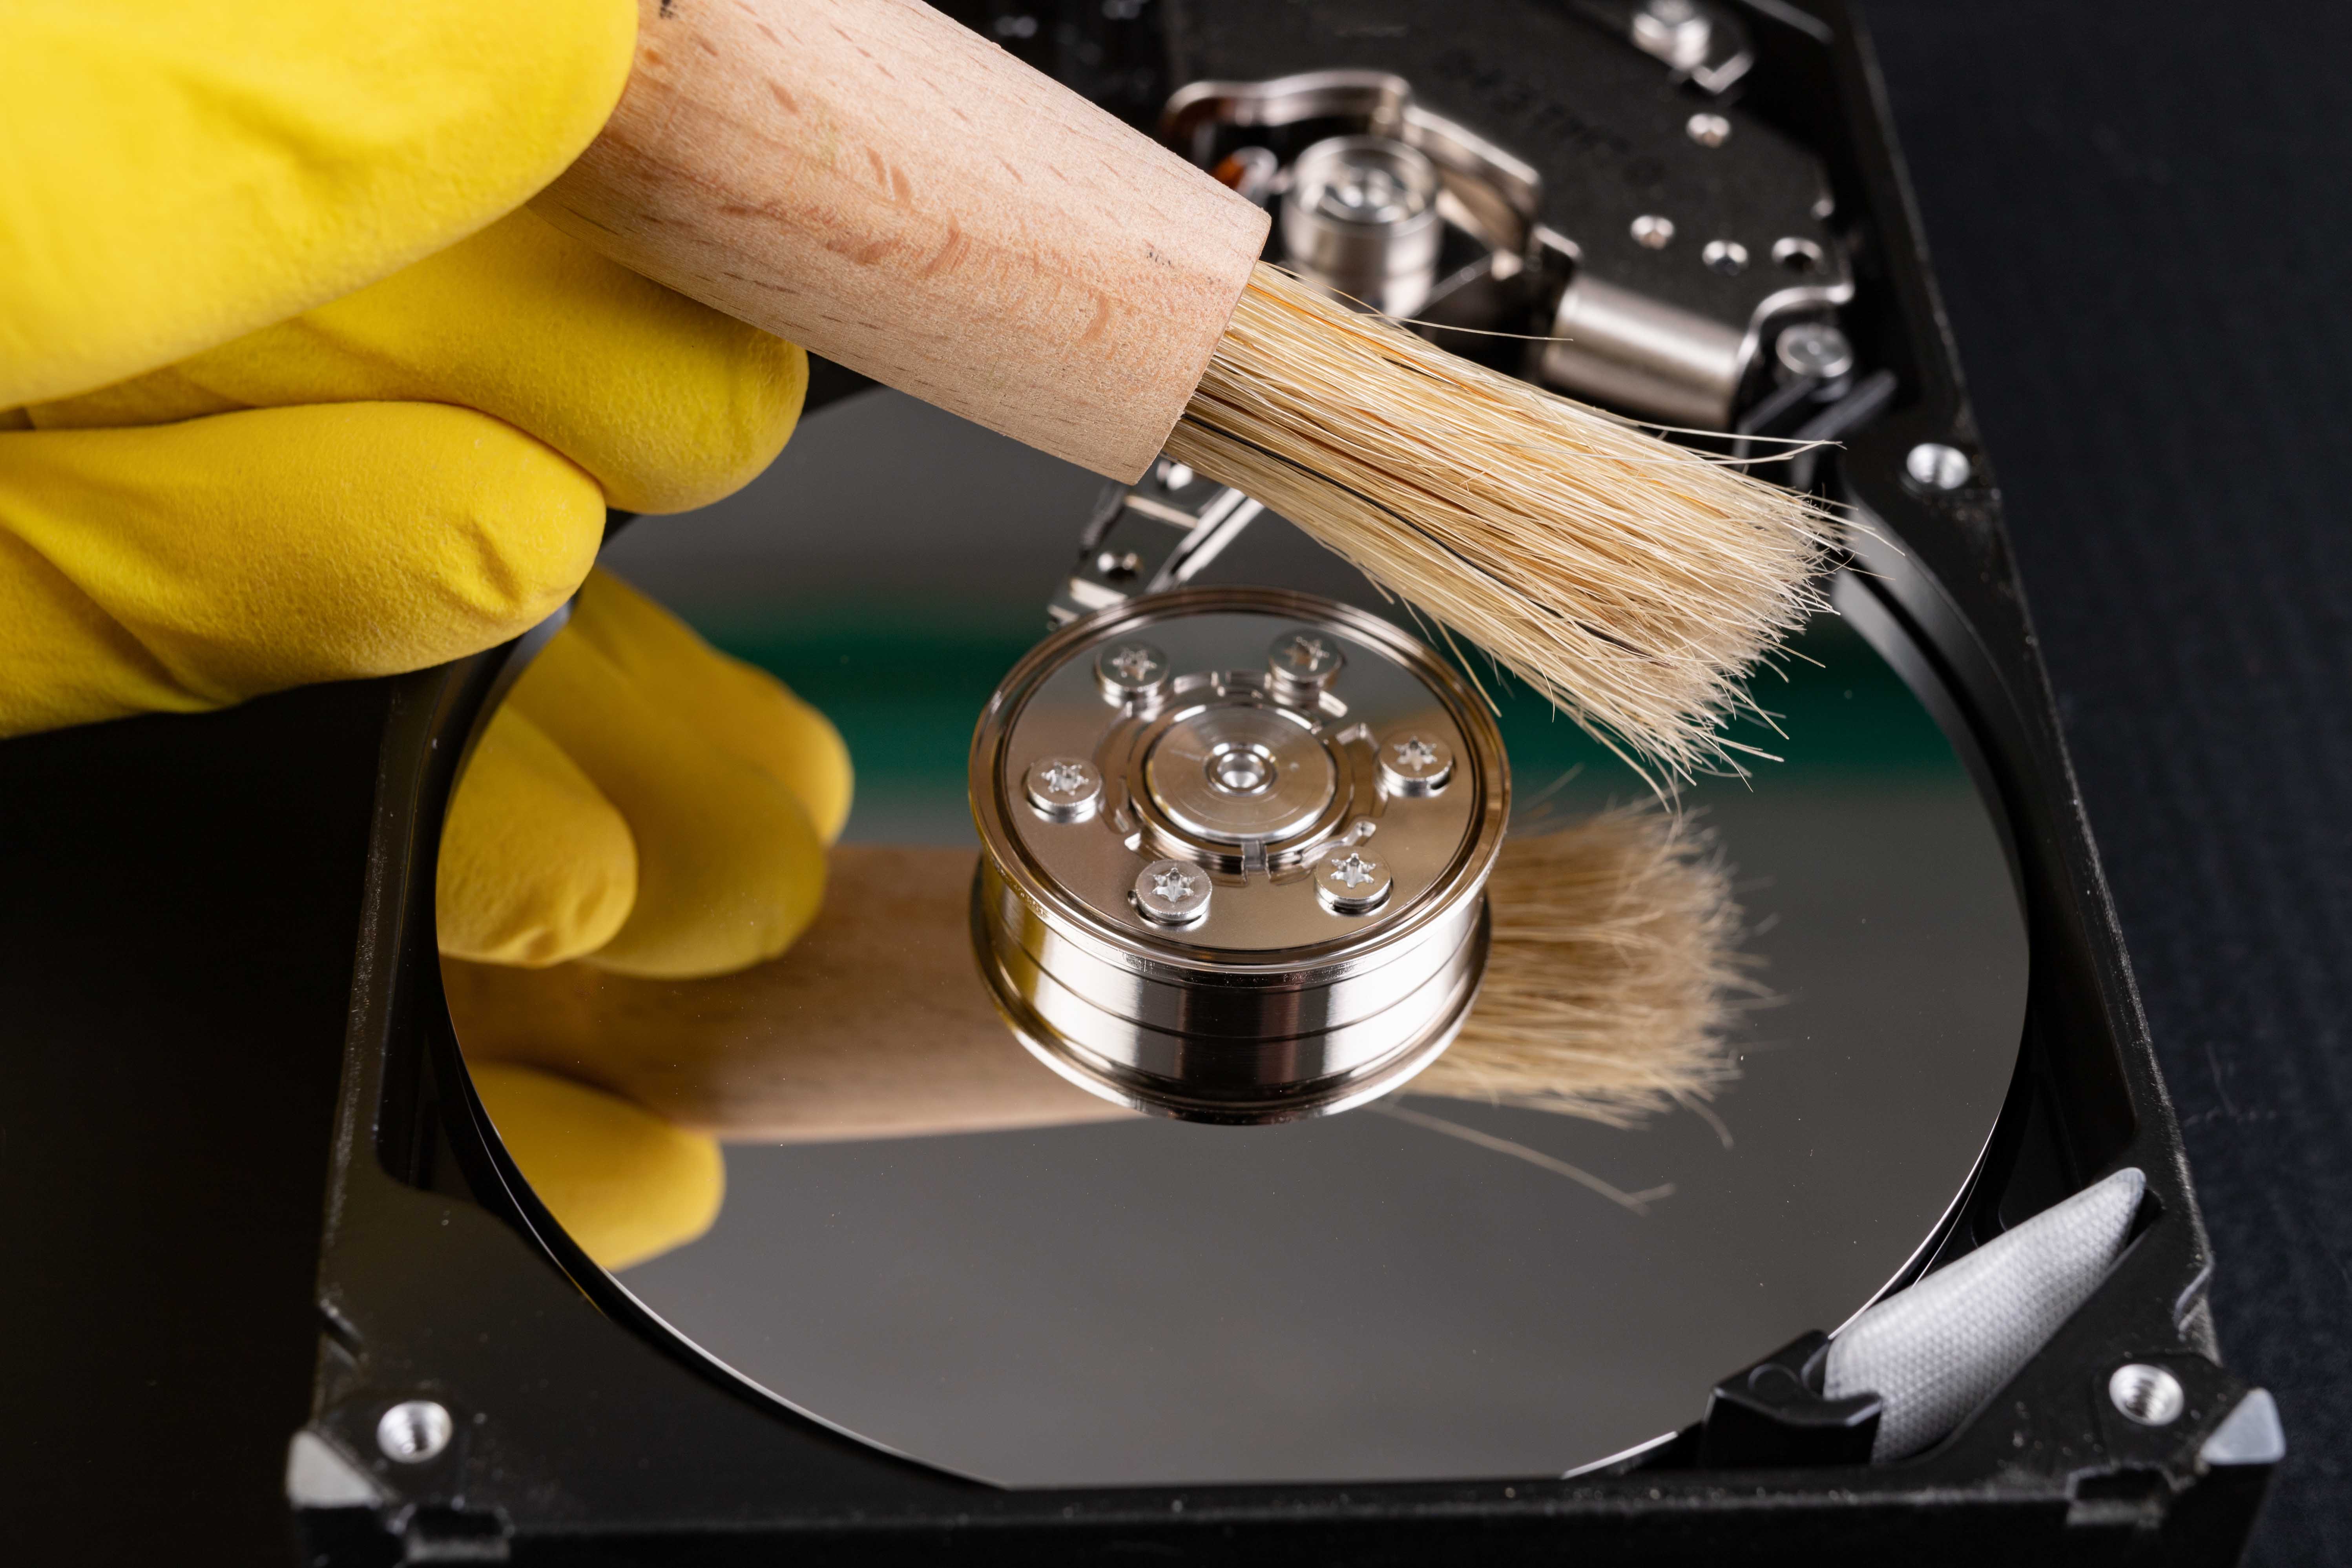 Cleaning the hard disk with a brush. Vacuuming old disk data on your computer. Dark background.